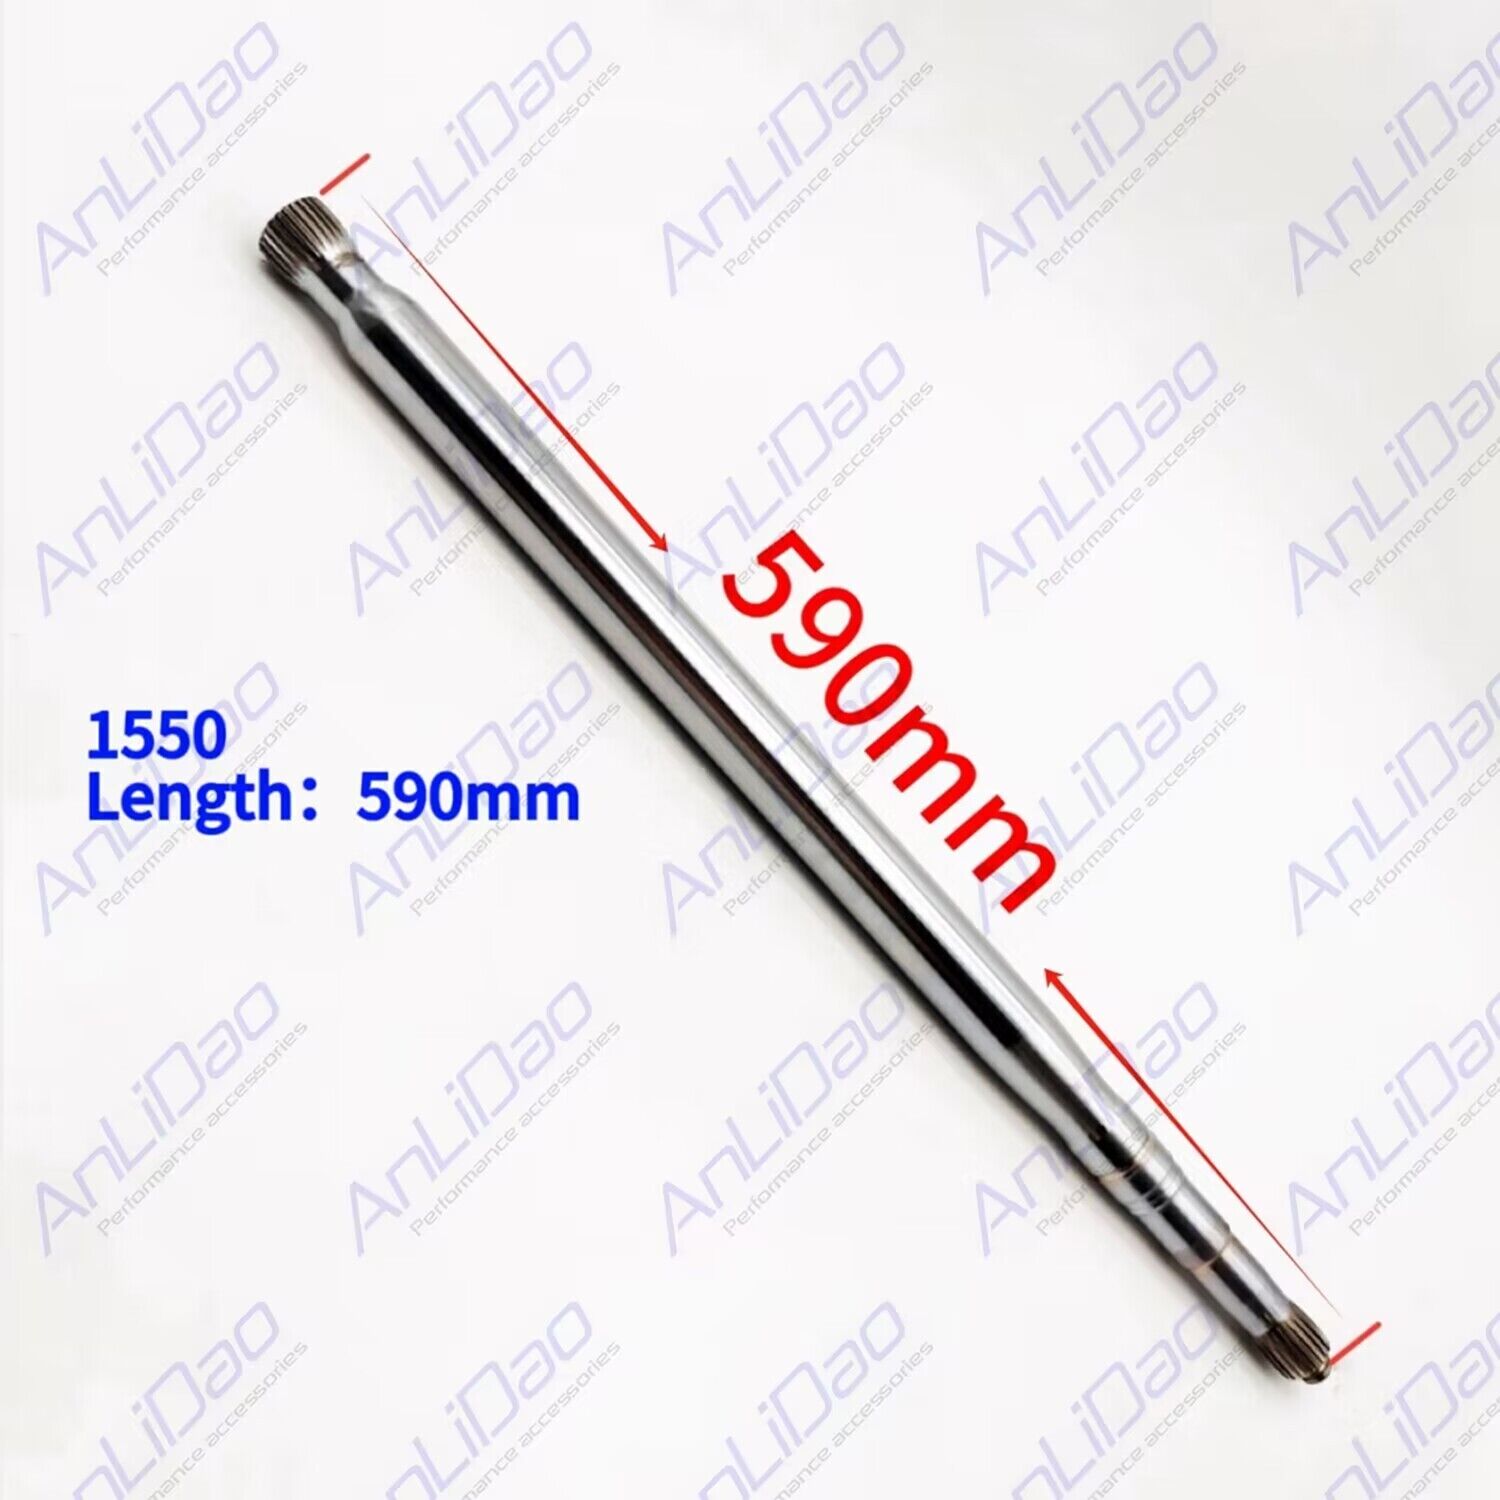 271001719 Fit For Sea Doo GTR GTX RXP RXT New Drive Shaft 23-1/4 Length 590mm